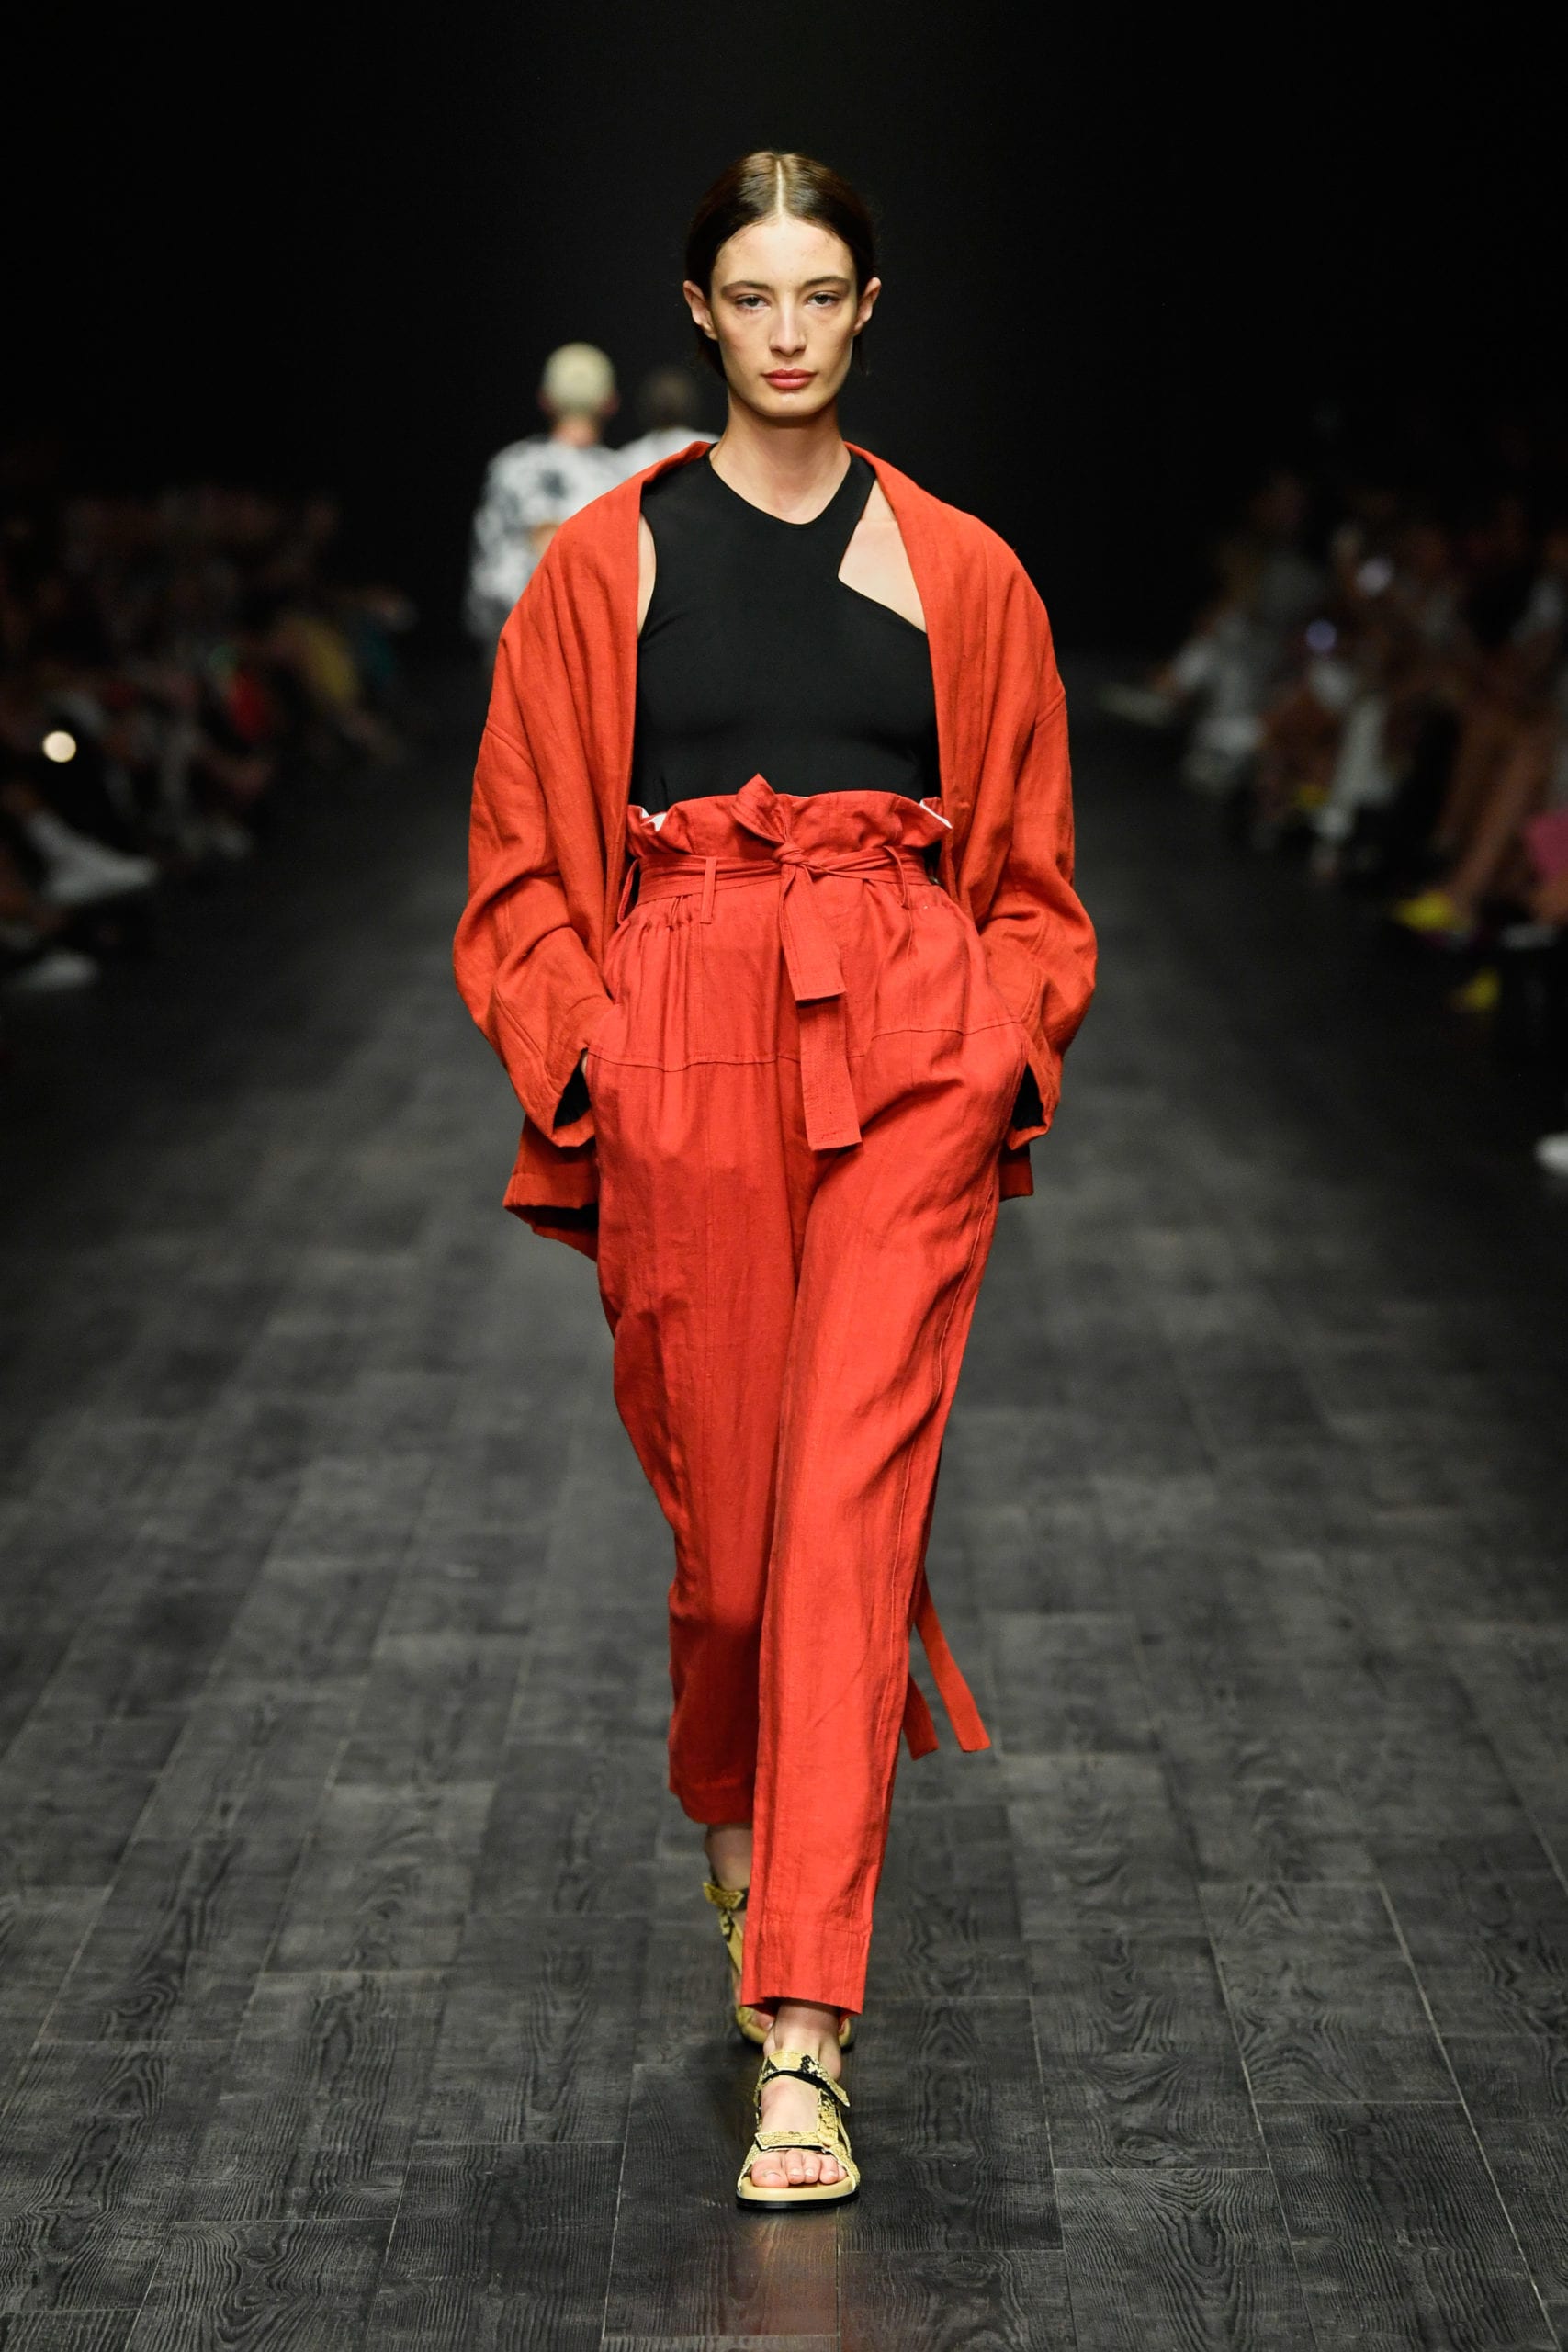 Our favourite looks from the 2020 David Jones VAMFF runway